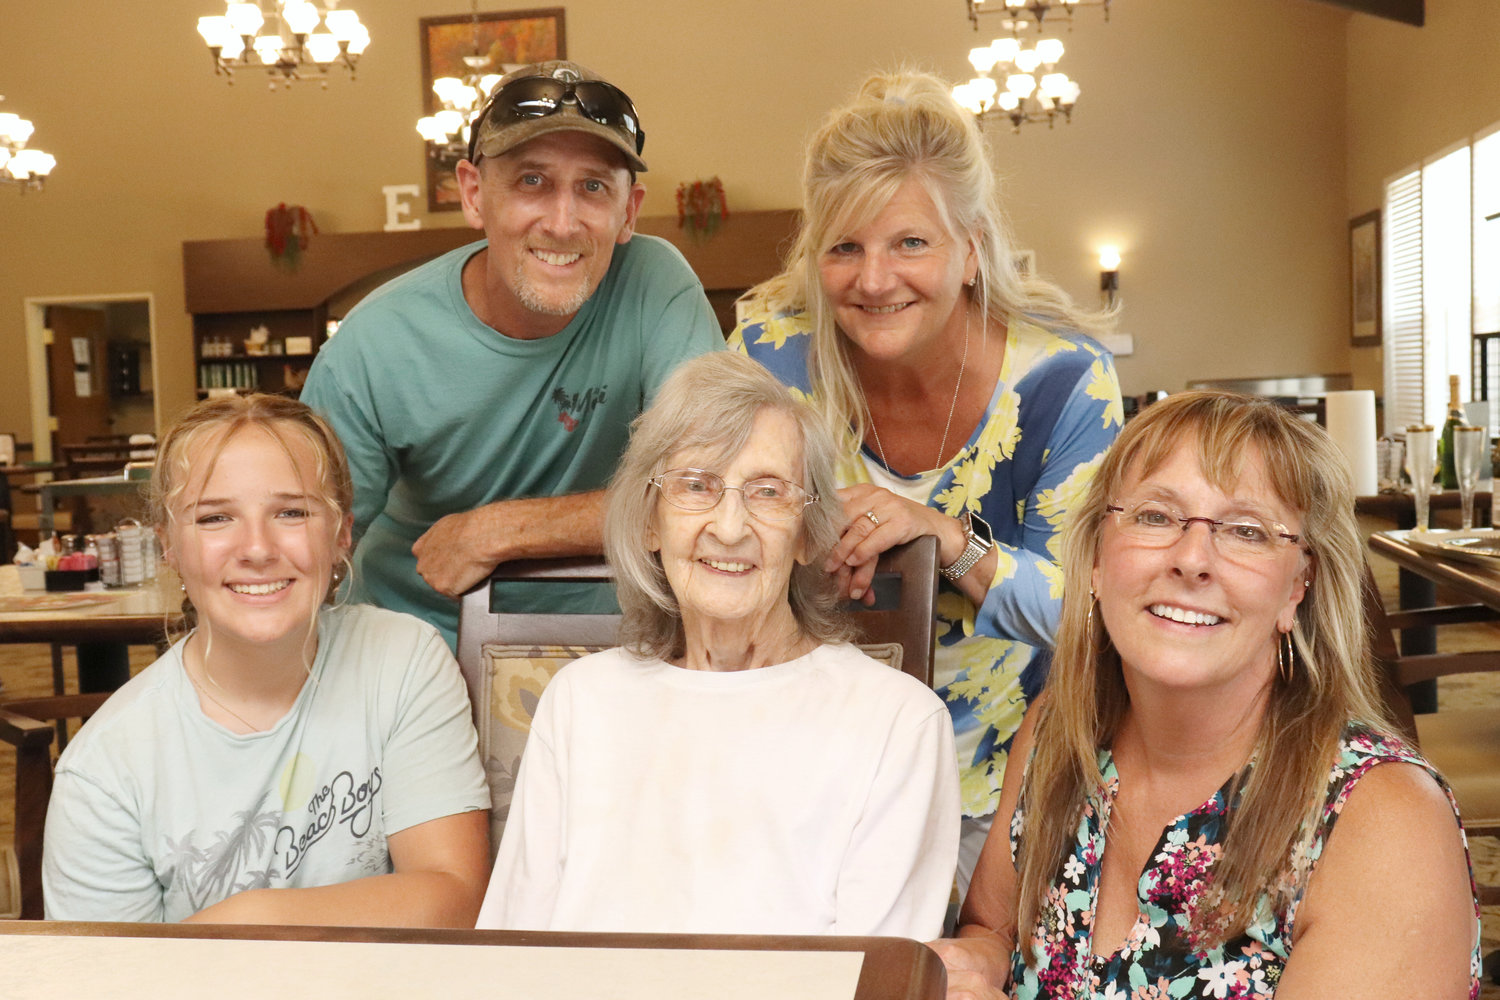 Agnes Wasson, who celebrated her 102nd birthday this week, smiles alongside her grandchildren and great grandchildren during a birthday celebration at Woodland Village in Chehalis on Monday.